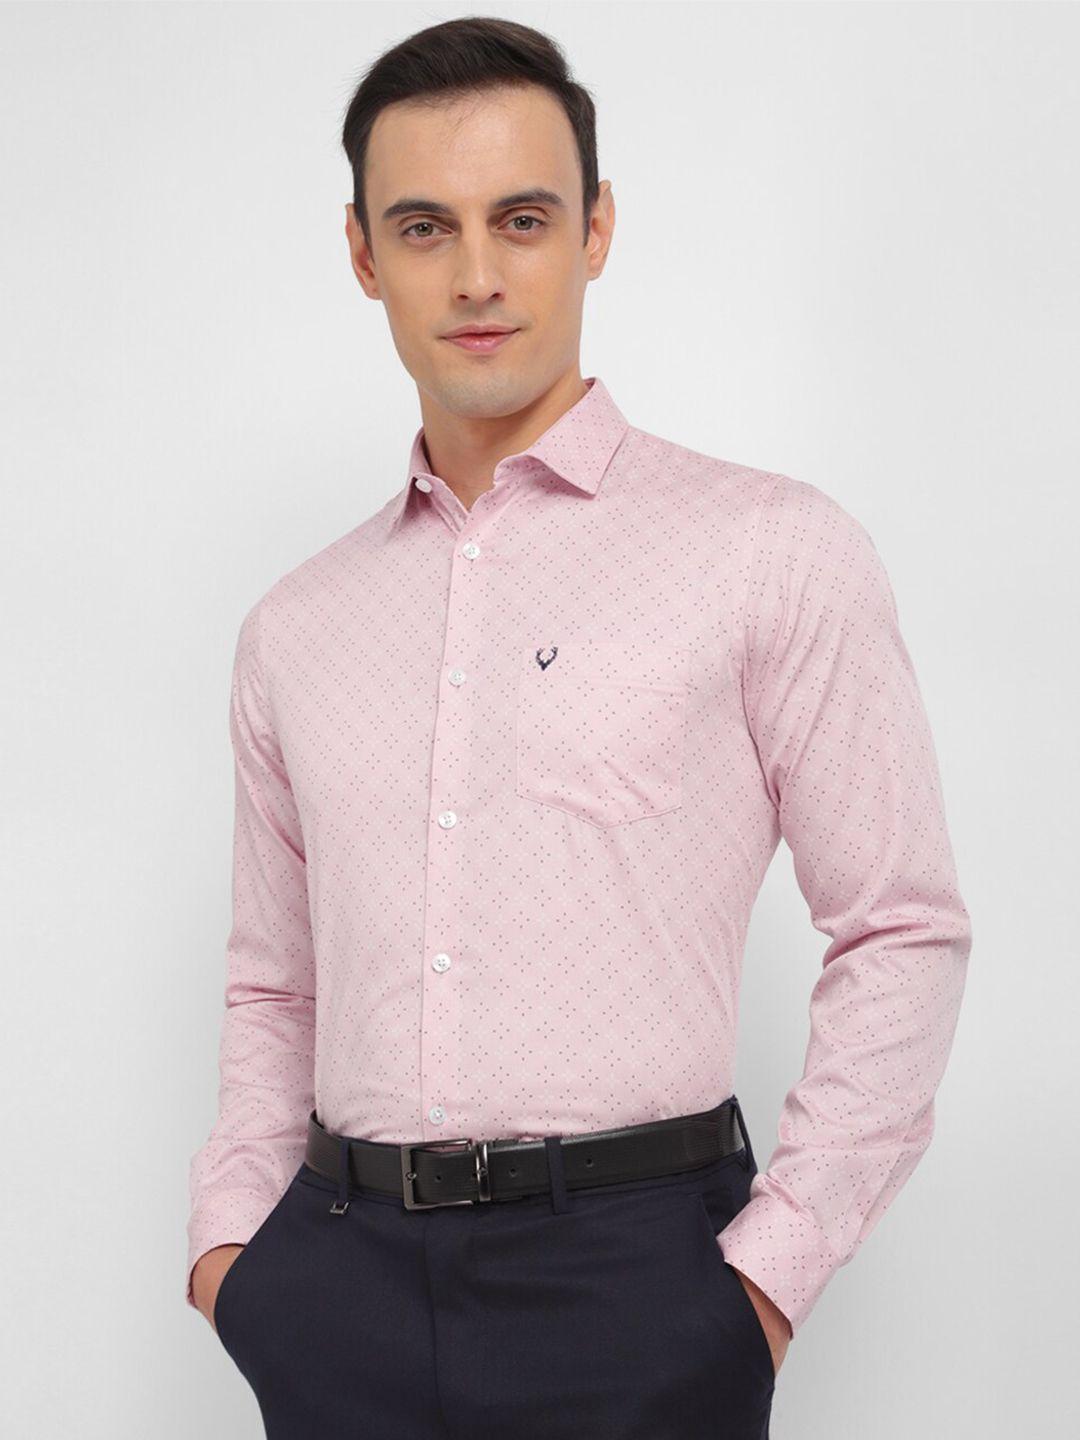 allen solly slim fit micro ditsy printed formal pure cotton shirt